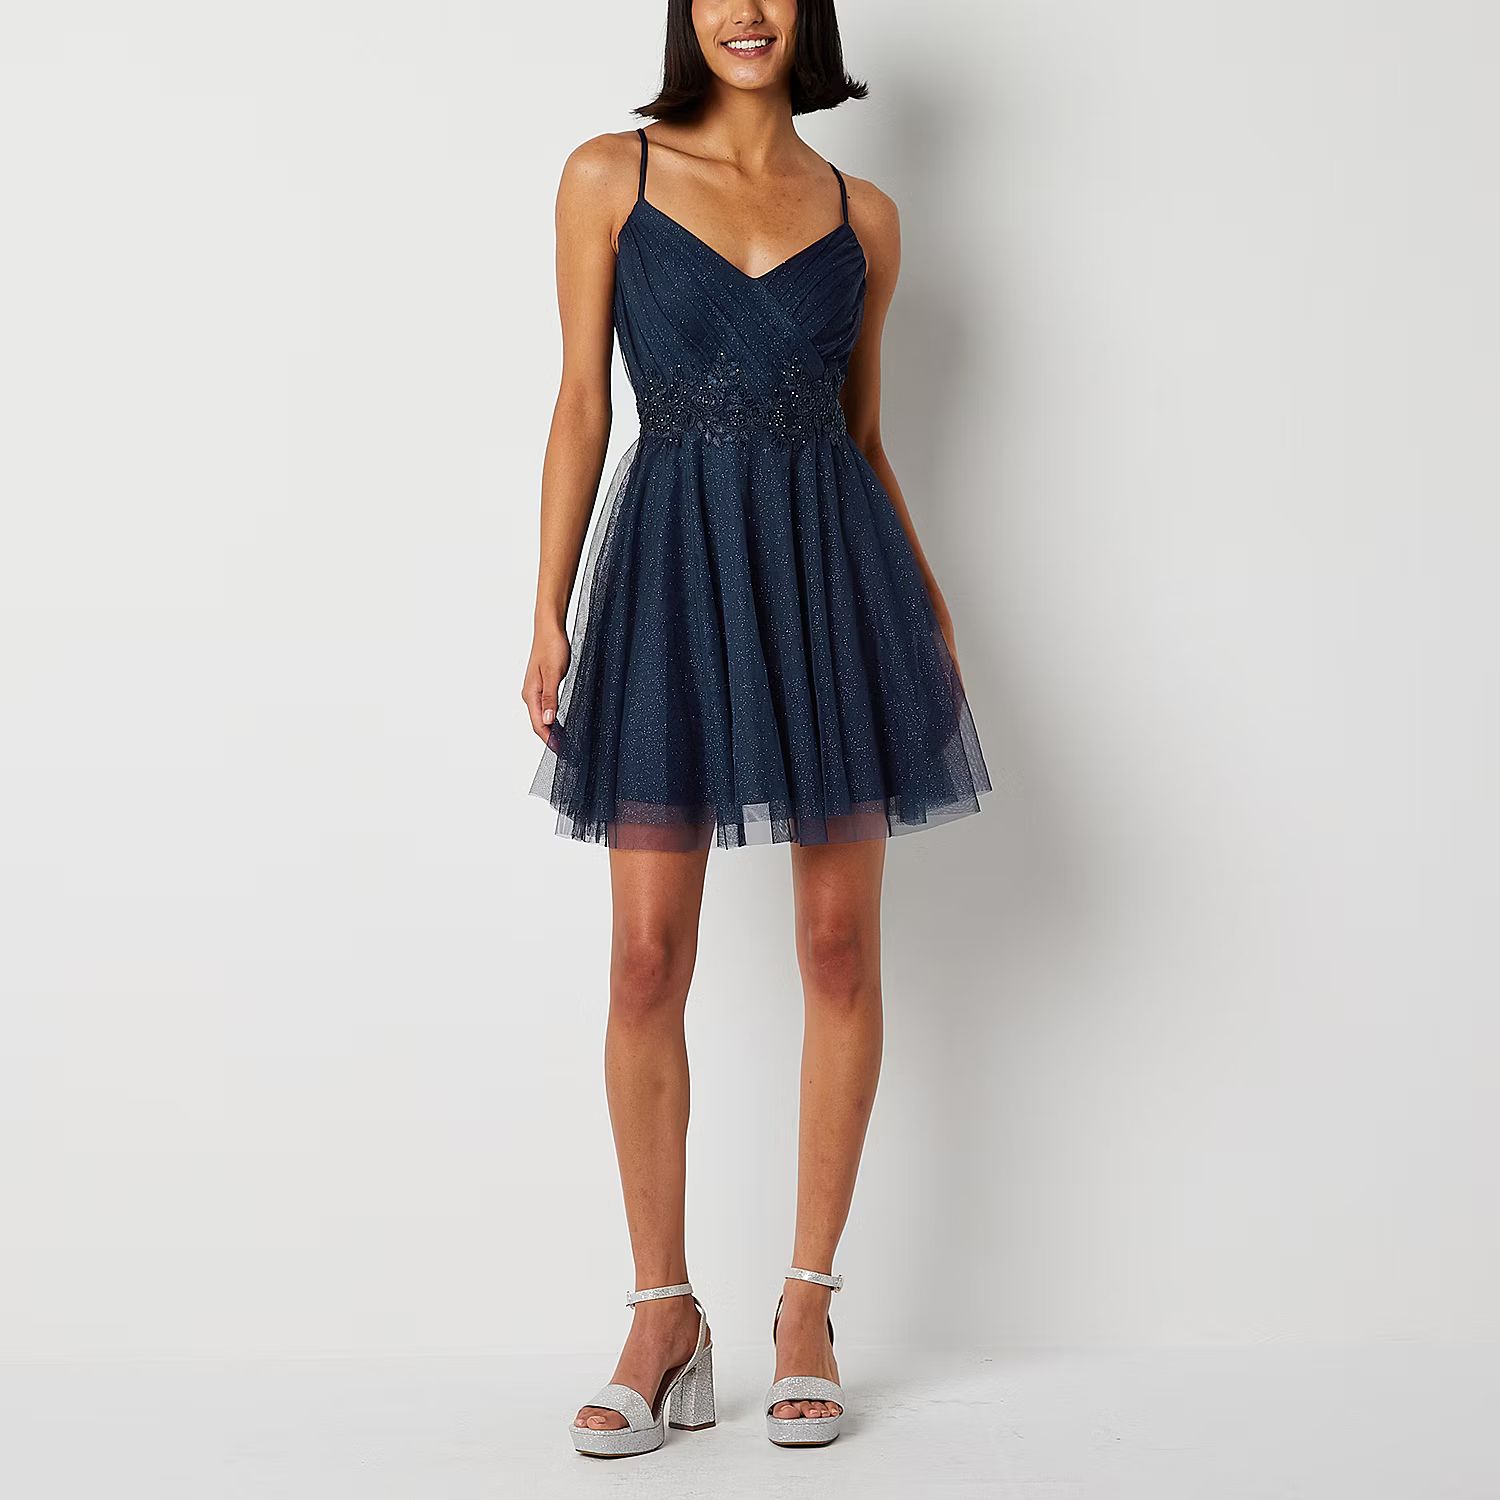 Pearl Juniors Sleeveless Applique Fit + Flare Dress | JCPenney